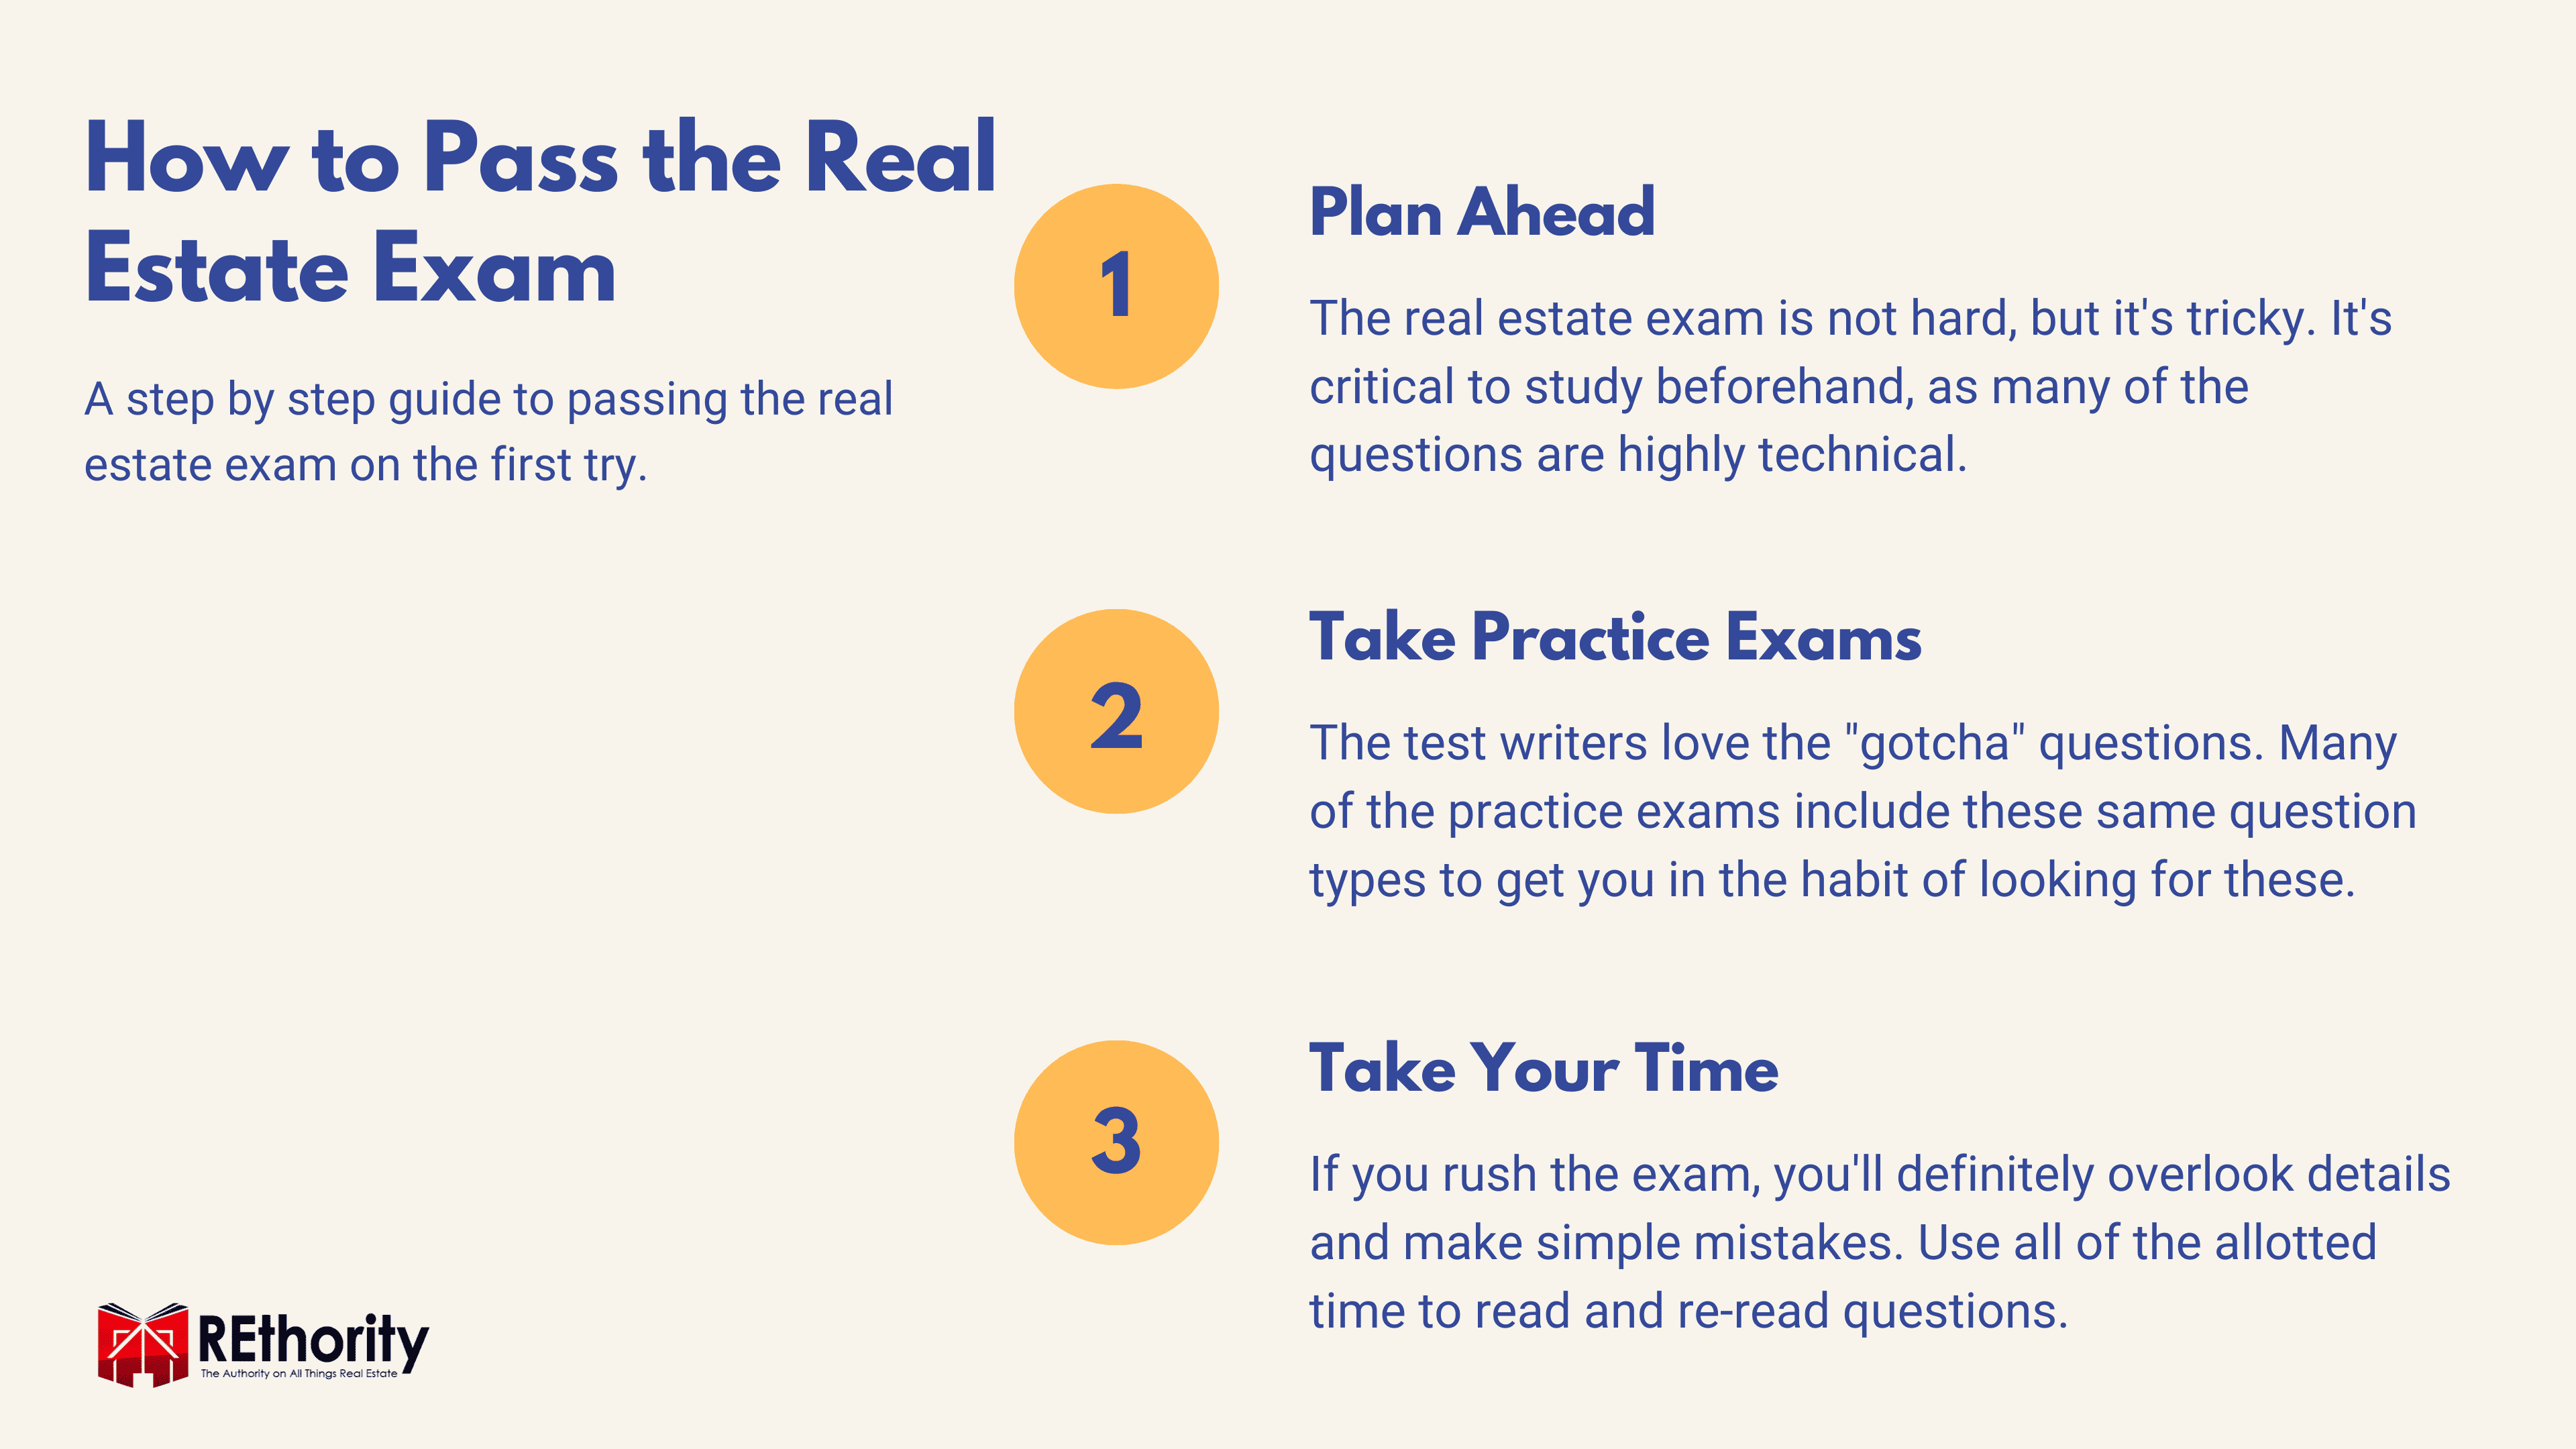 How to pass the real estate exam on the first try